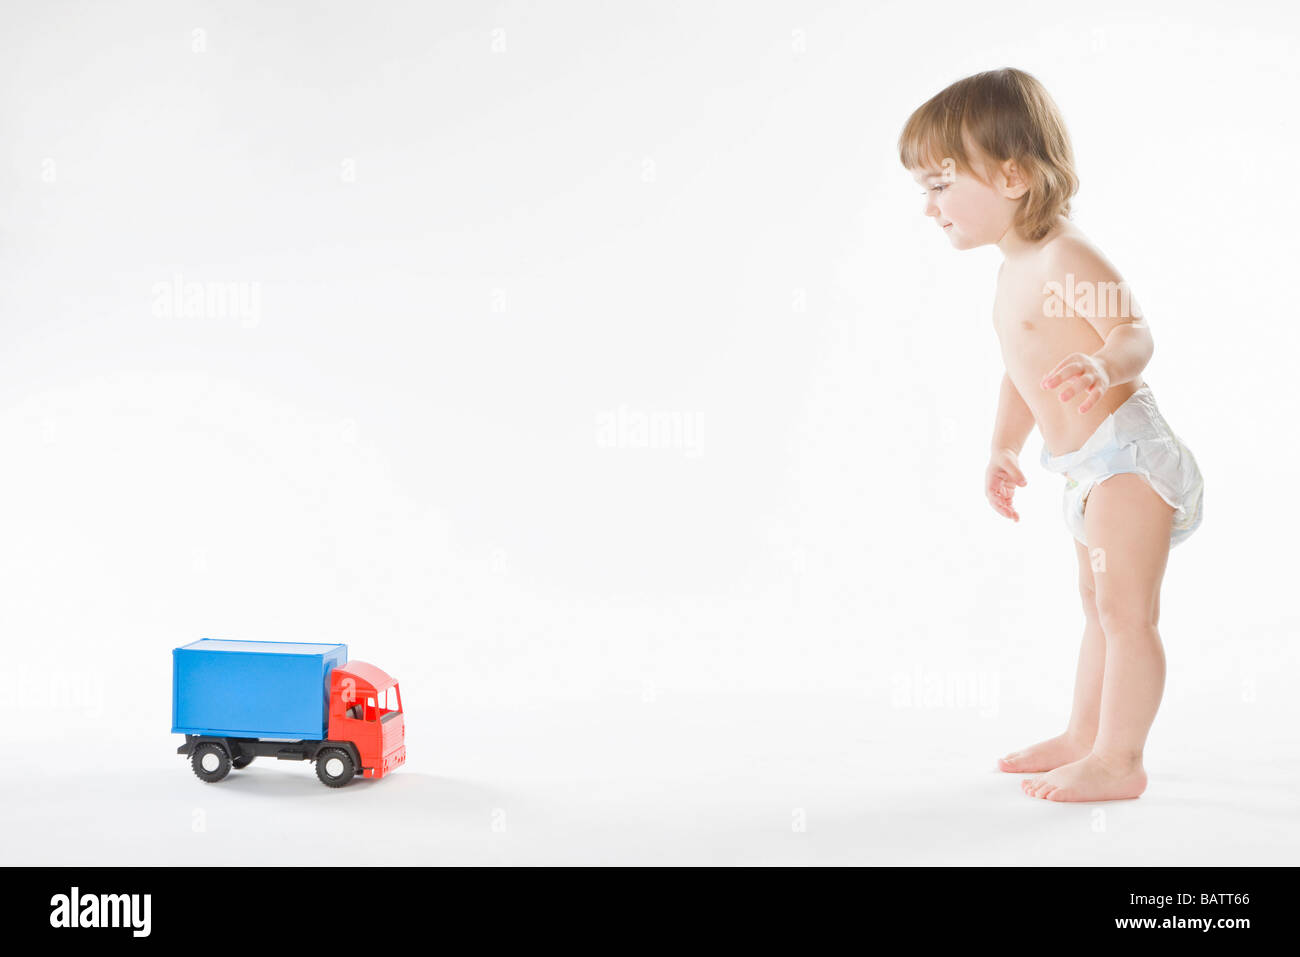 baby girl playing with toy truck Stock Photo